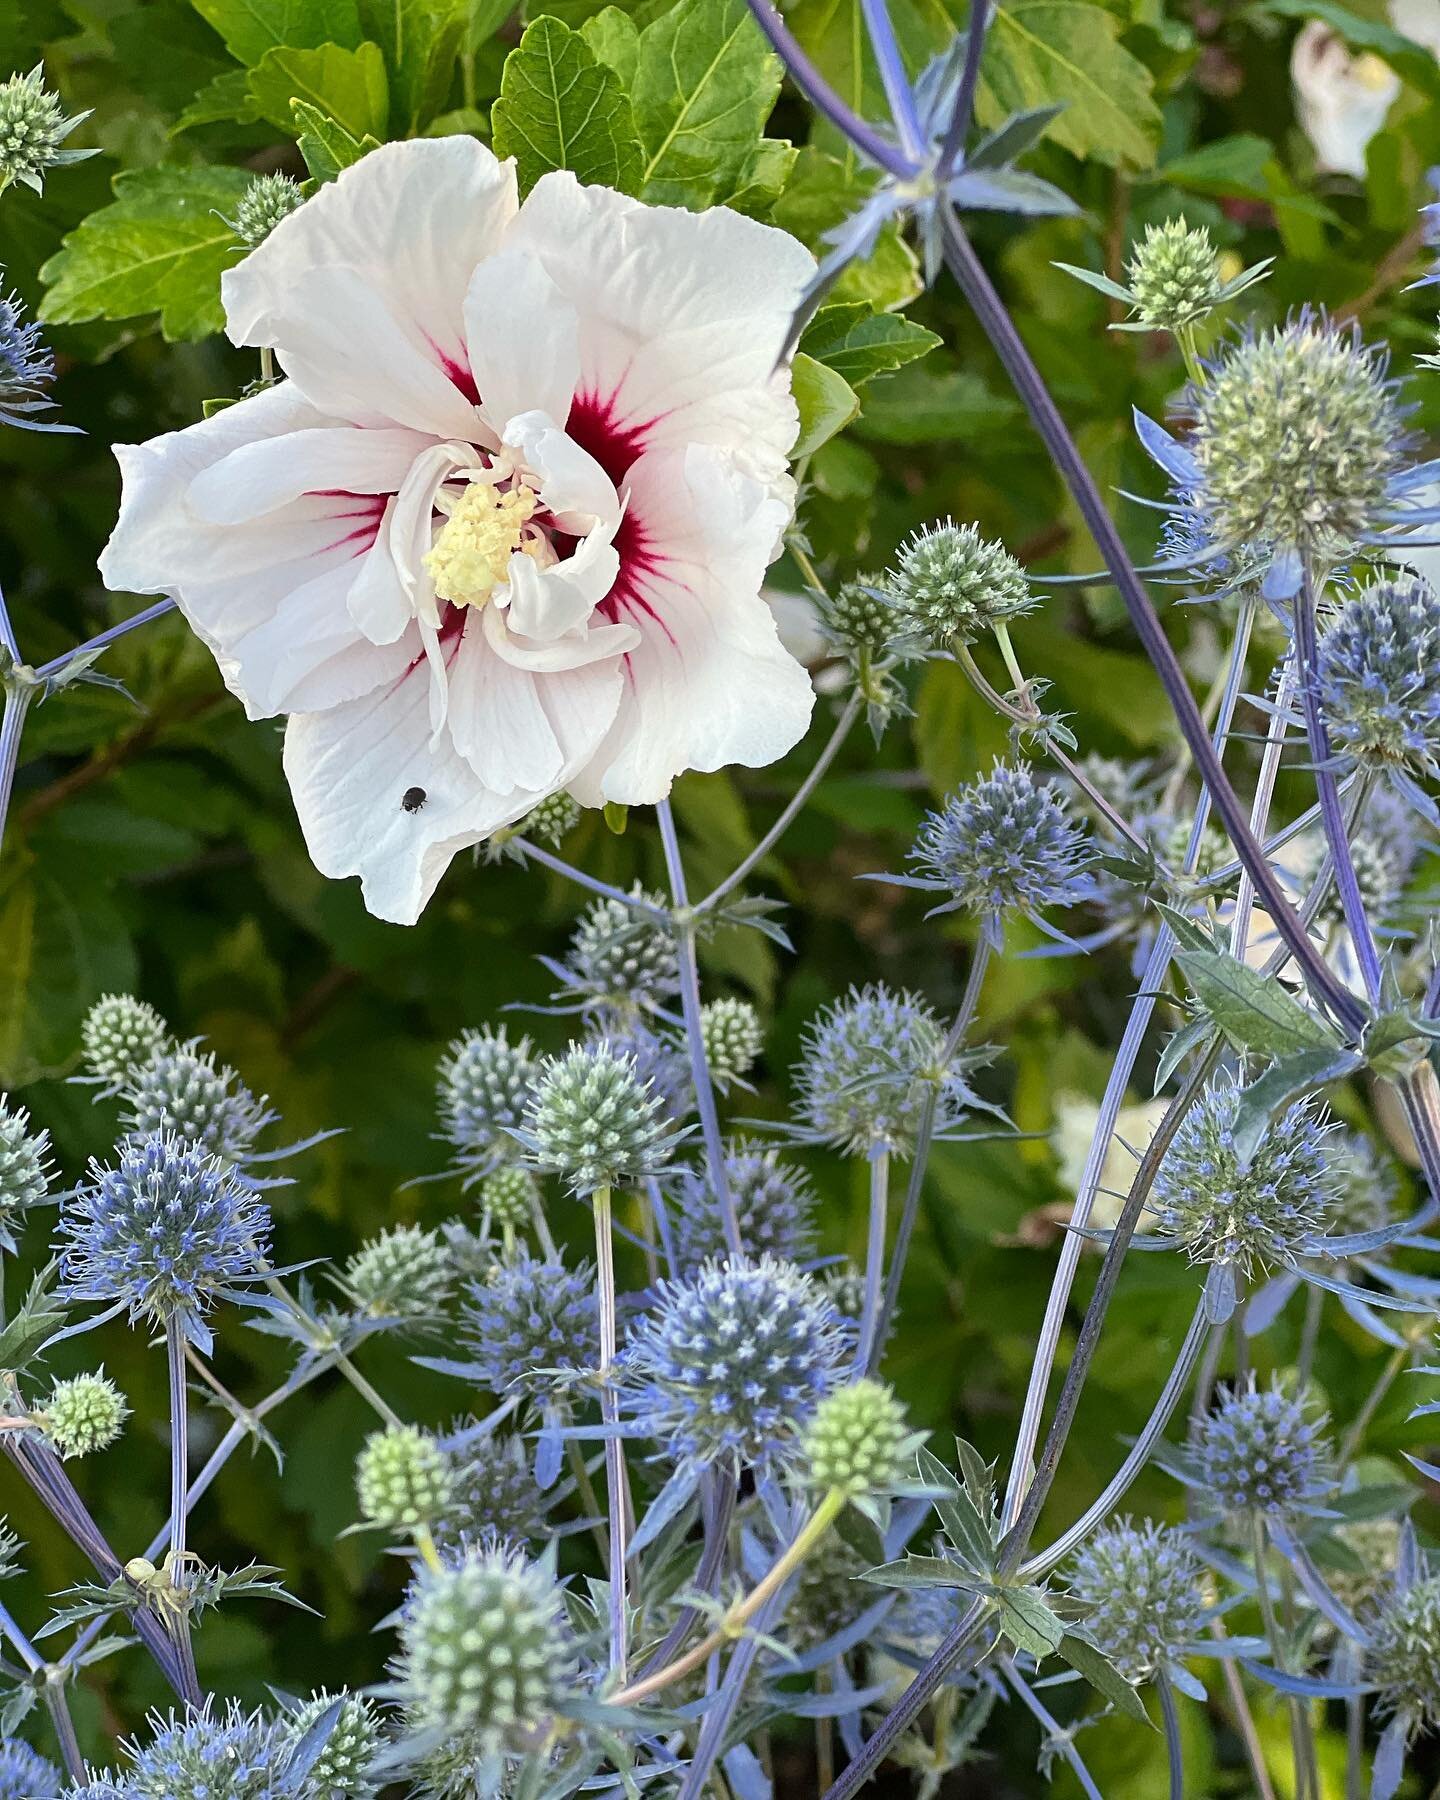 Sea Hollies versus Globe Thistles. This first photo shows a Summer garden combo that appeals to anyone who loves their pastel colour range #Hibiscus_syriacus in a sea of #Eryngium_planum Swipe left to compare with the larger Southern Globe Thistle #E